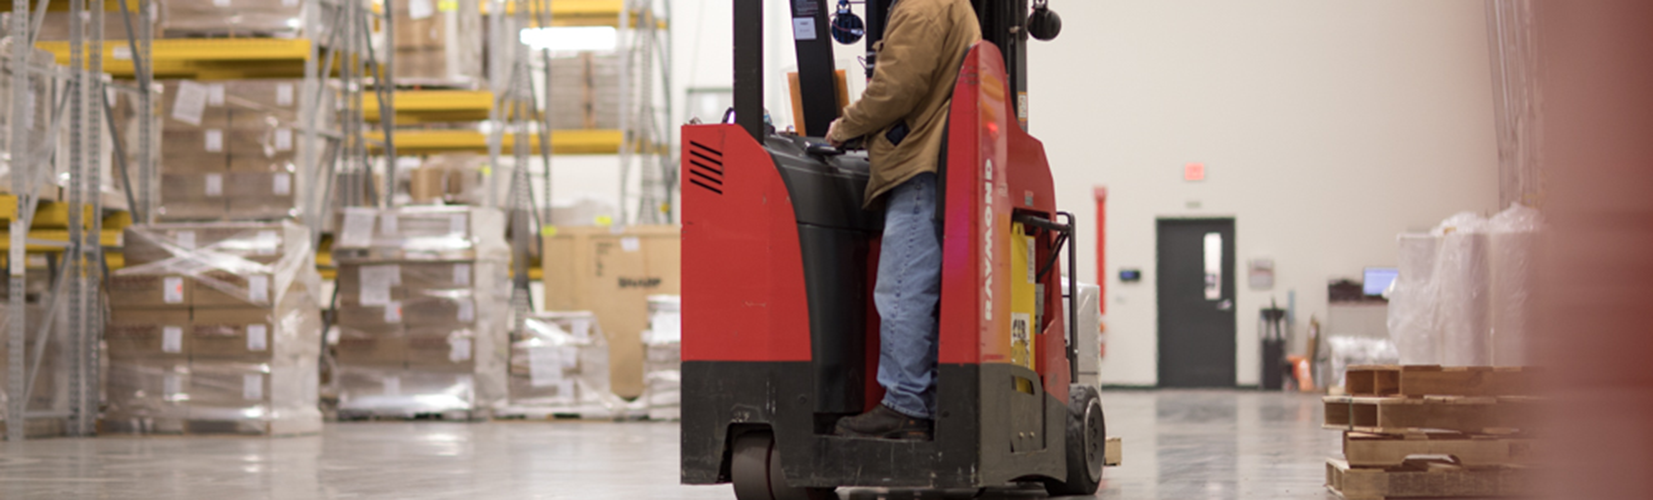 A worker drives a red forklift in a warehouse